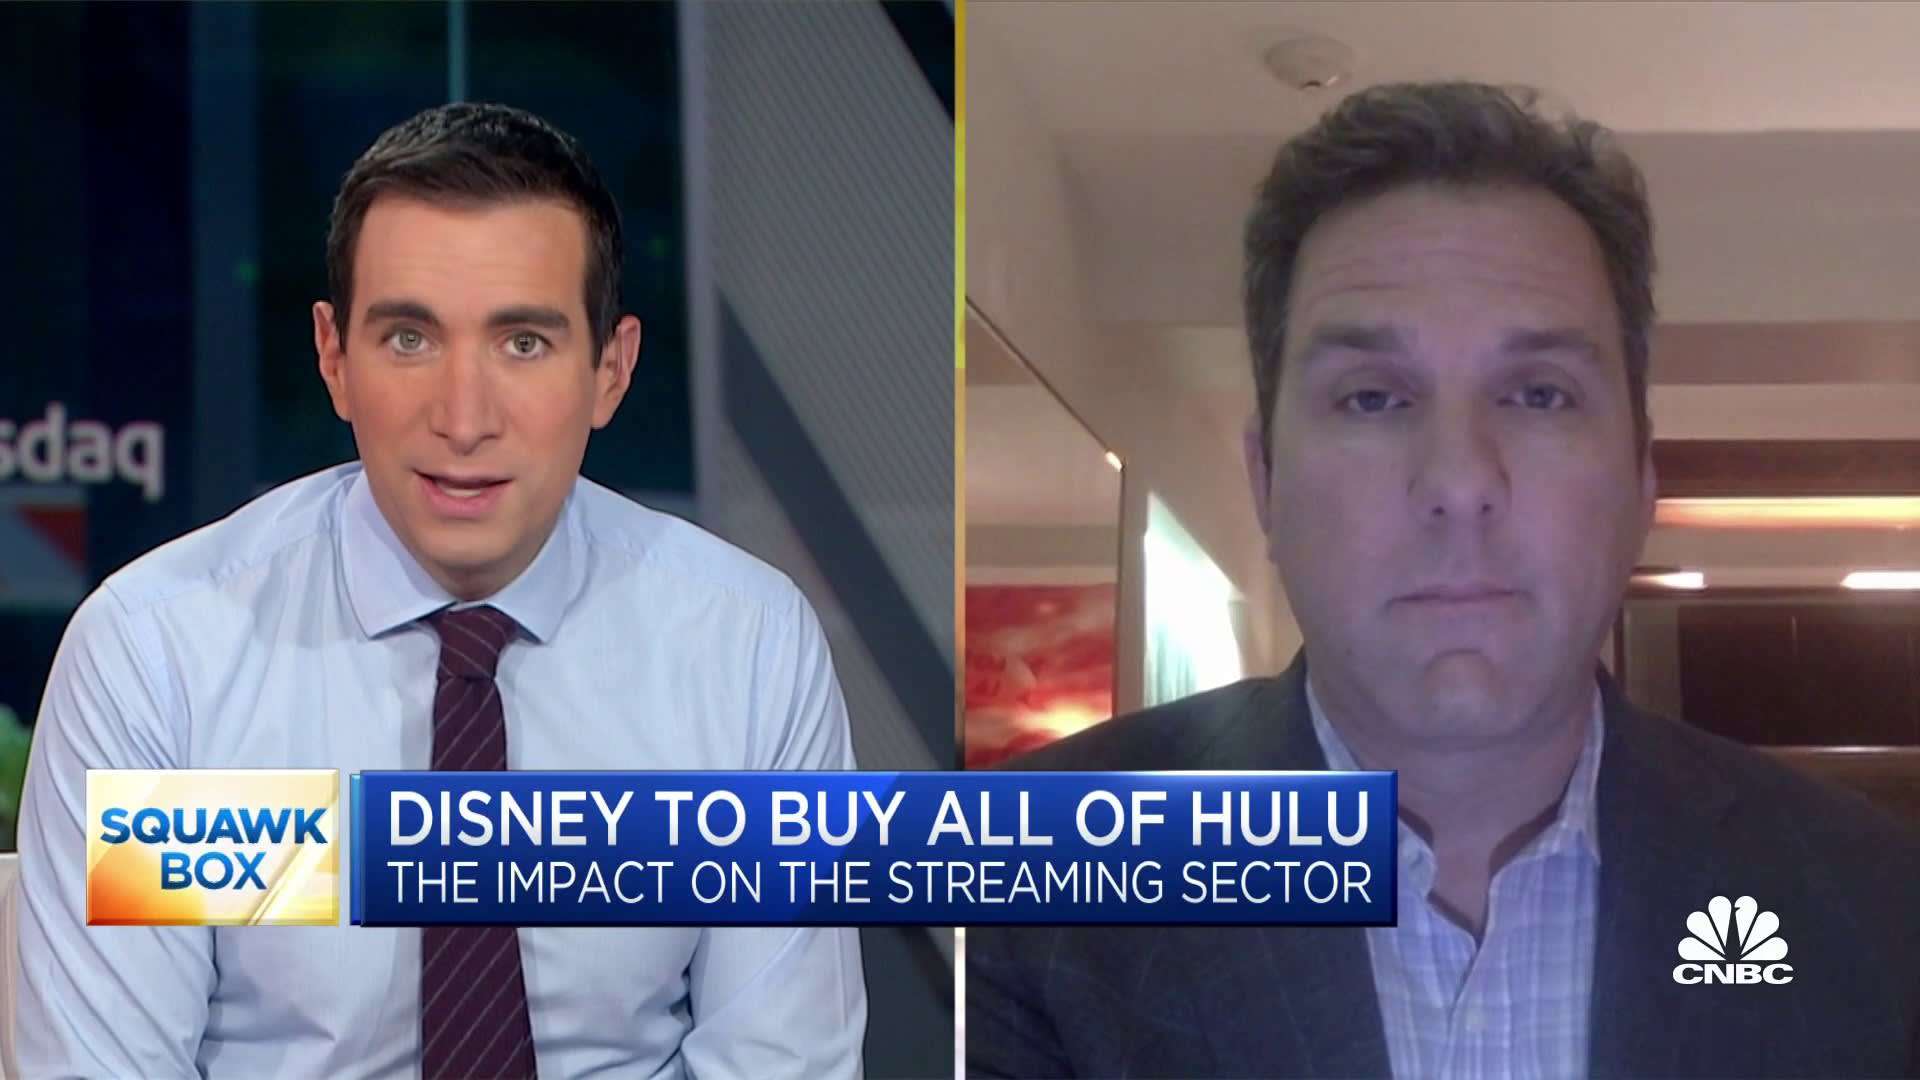 Hulu can help bring ads to the rest of the Disney ecosystem, says Puck's Matt Belloni